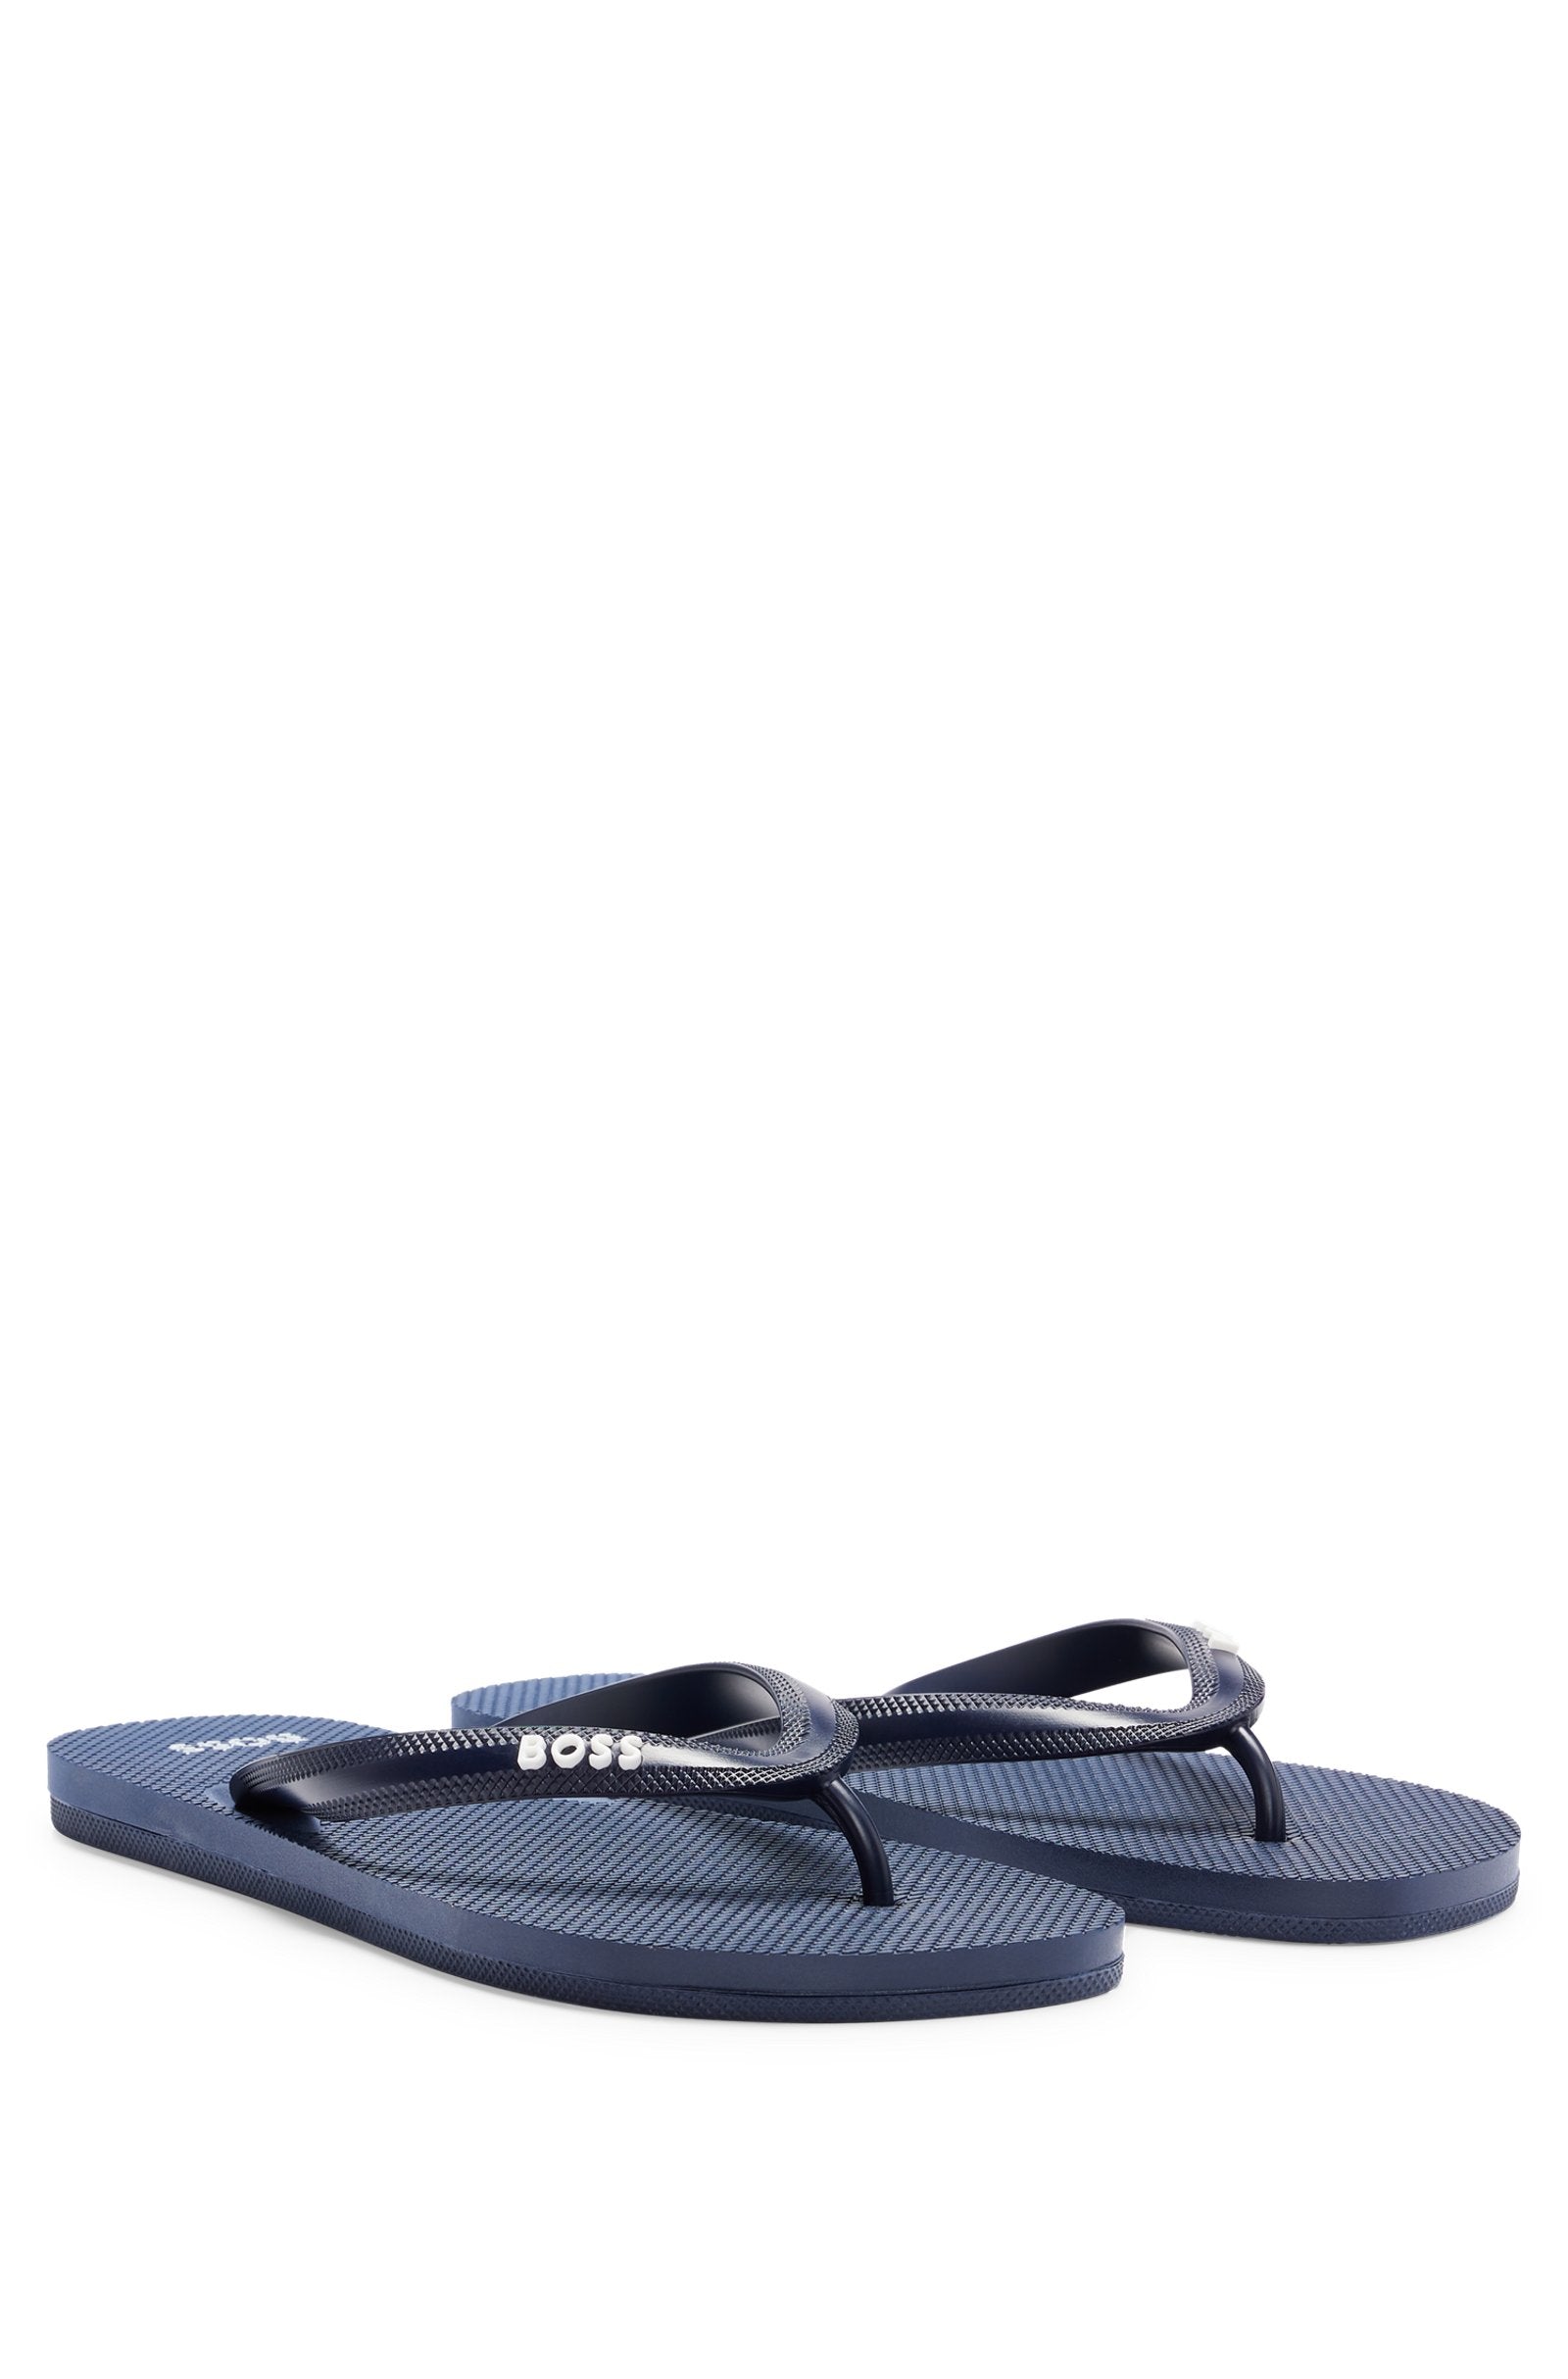 BOSS - TRACY_THNG Dark Blue Flip Flops With Branded Strap 50498208 405